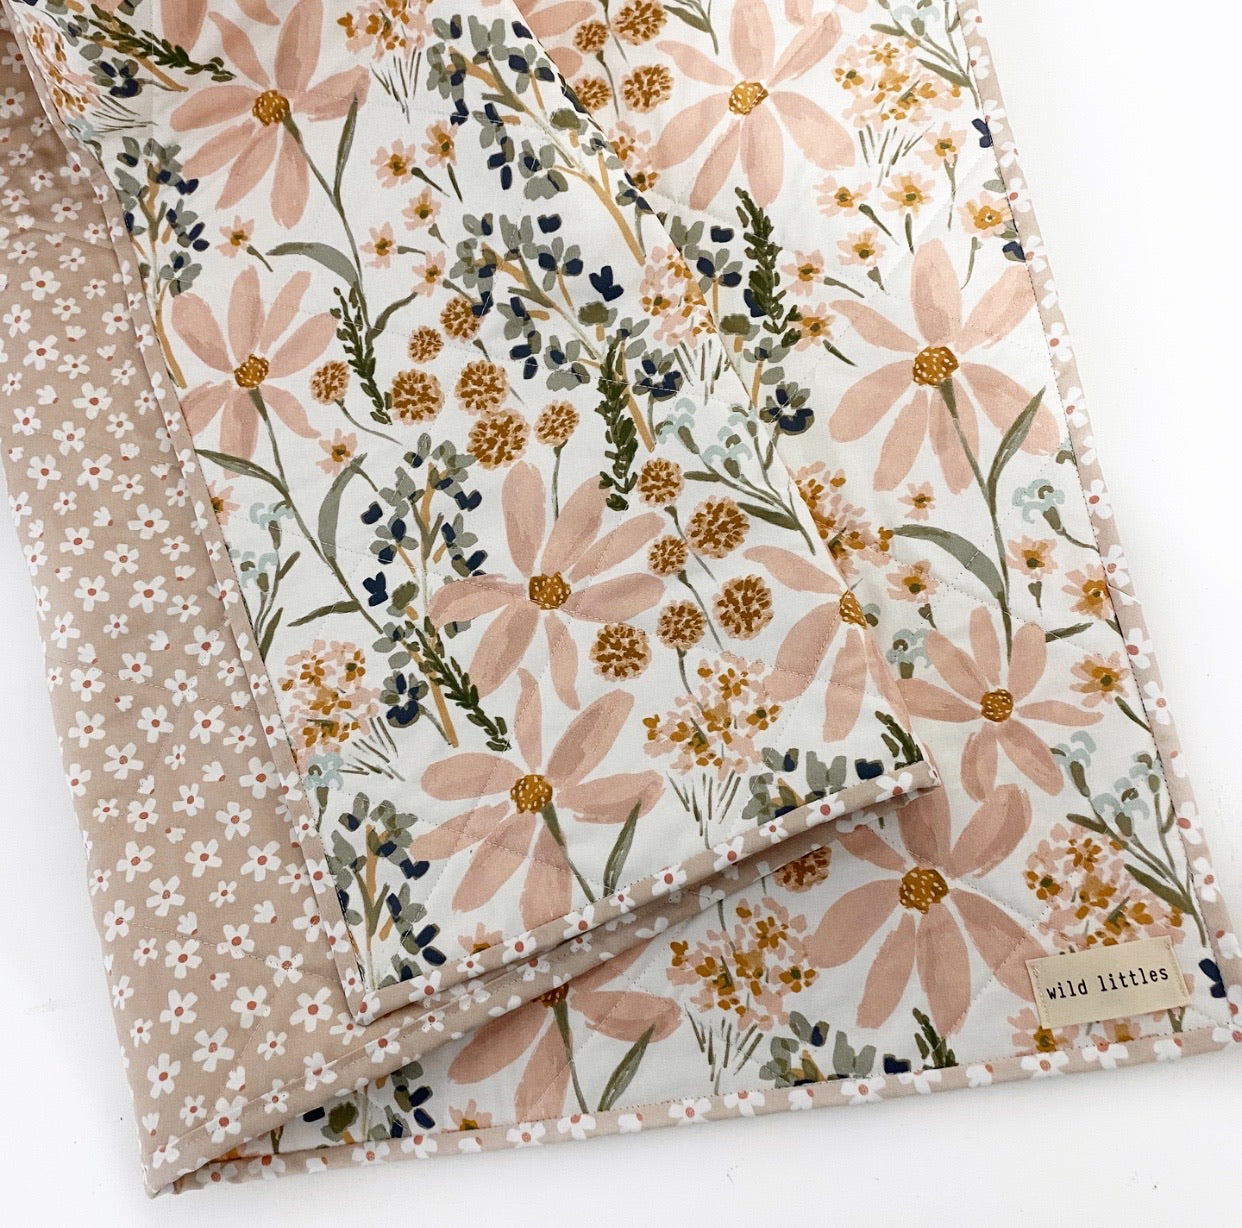 Daisy Bloom Wholecloth Quilt - Made to Order | Wild Littles